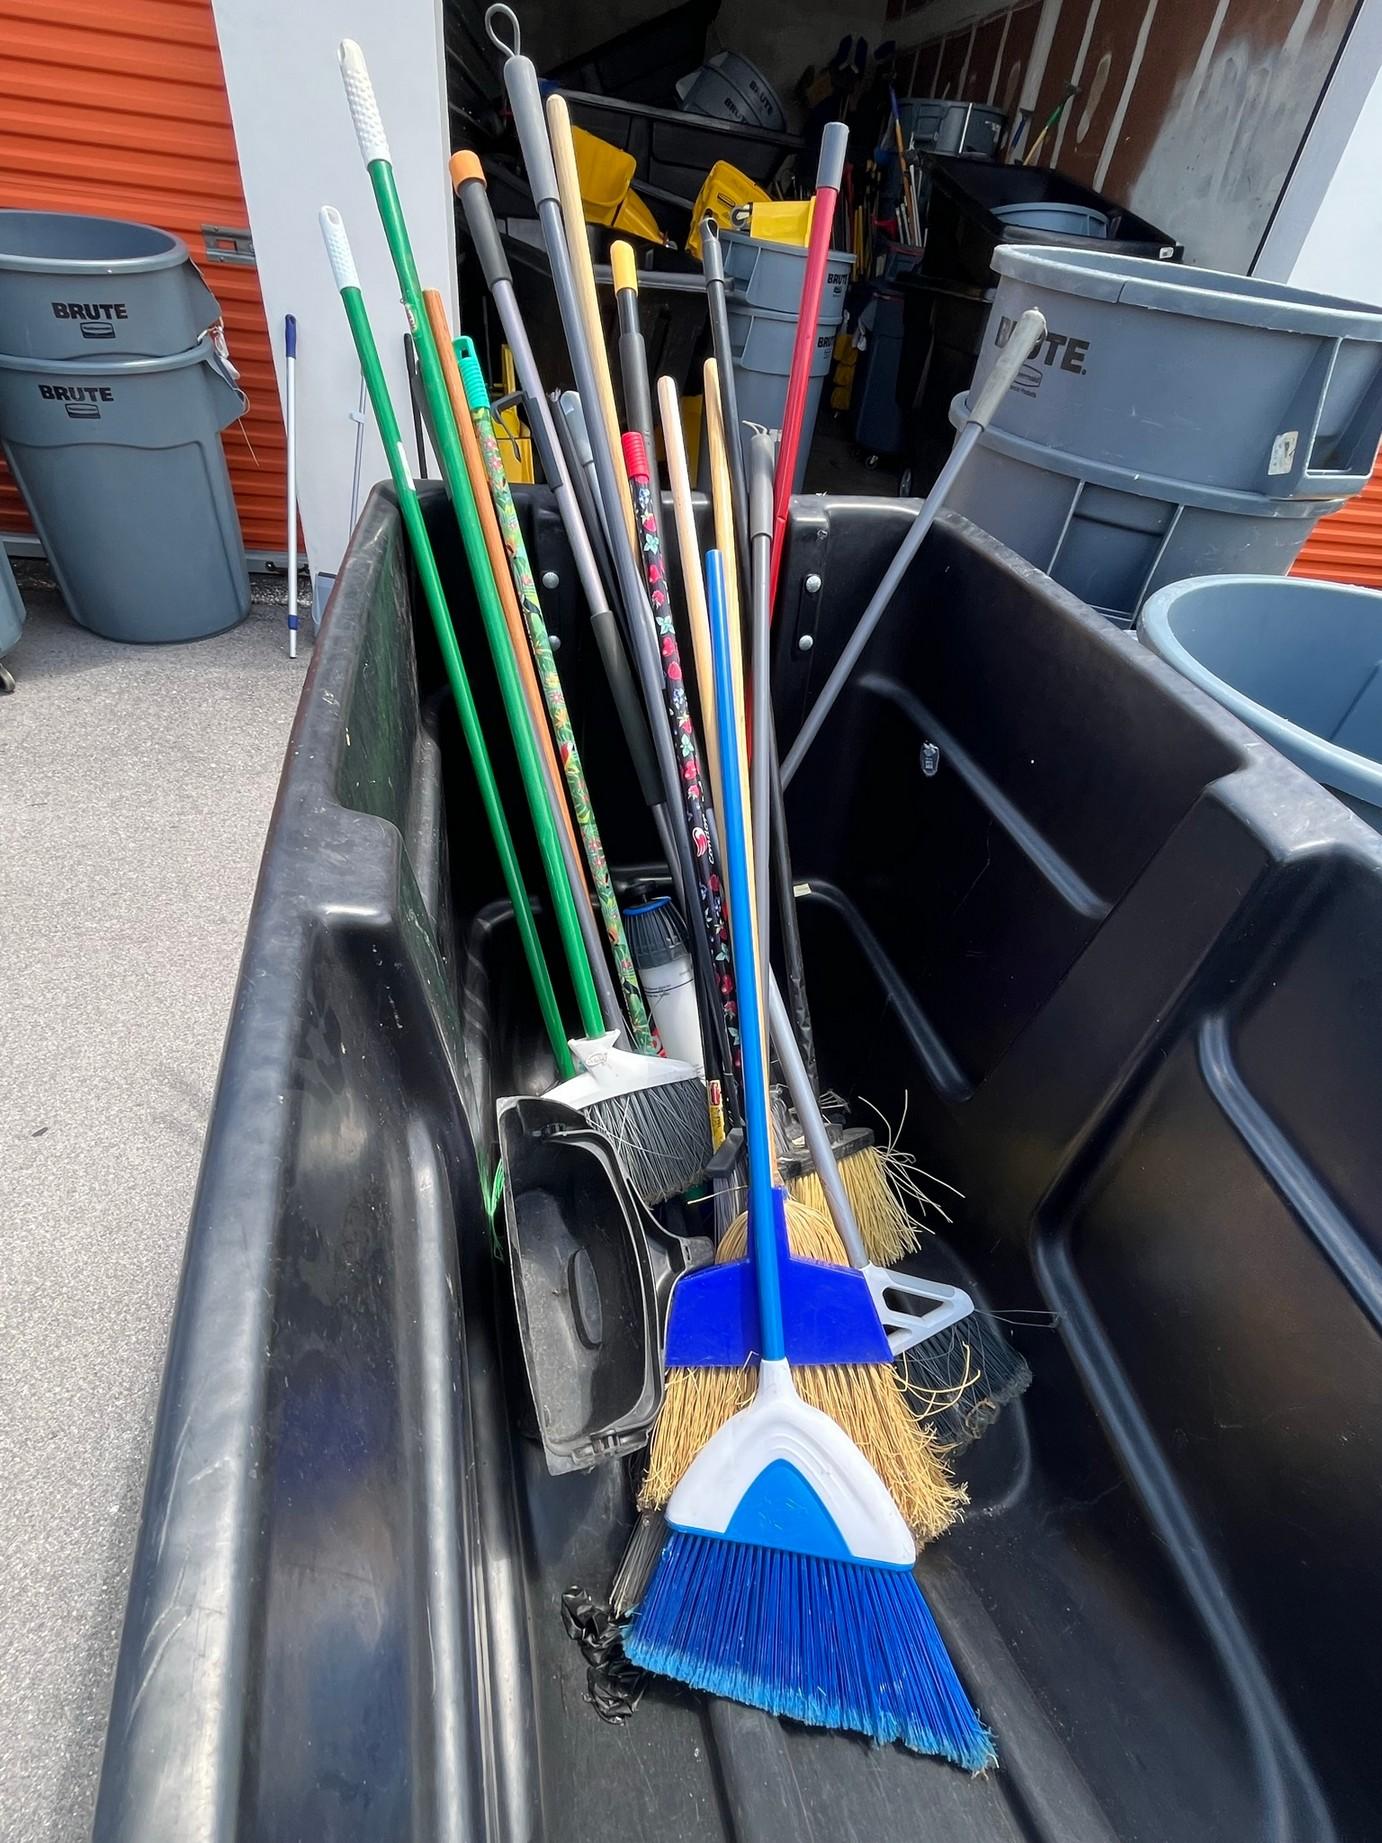 ASSORTED BROOMS (TRASH CAN NOT INCLUDED) (POMPANO, FL S21)